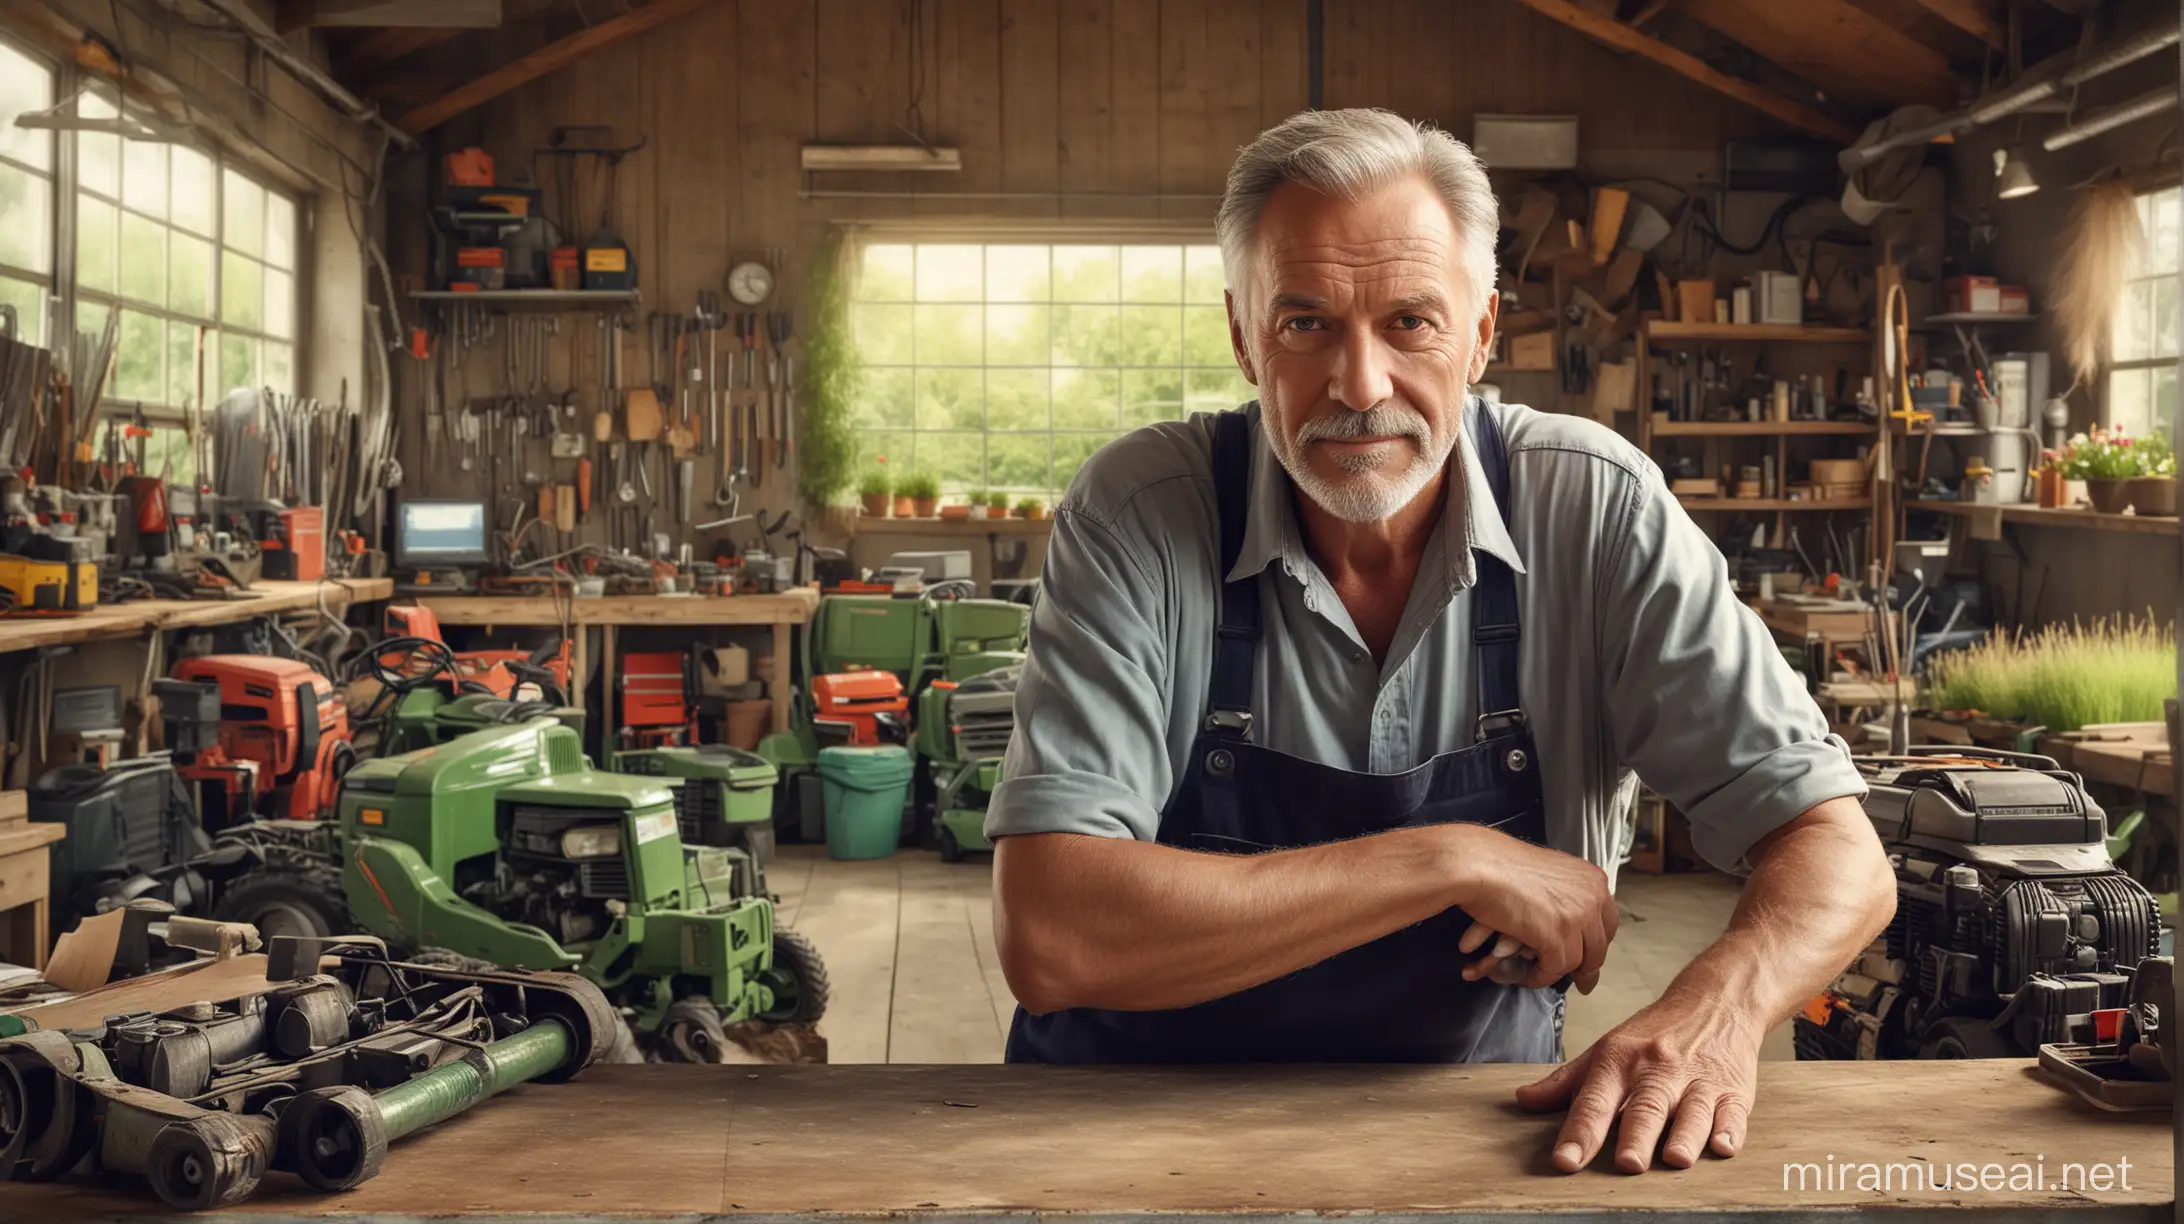 Older Handsome Man at Industrial Workshop Counter Surrounded by Lawn Mowers and Garden Equipment